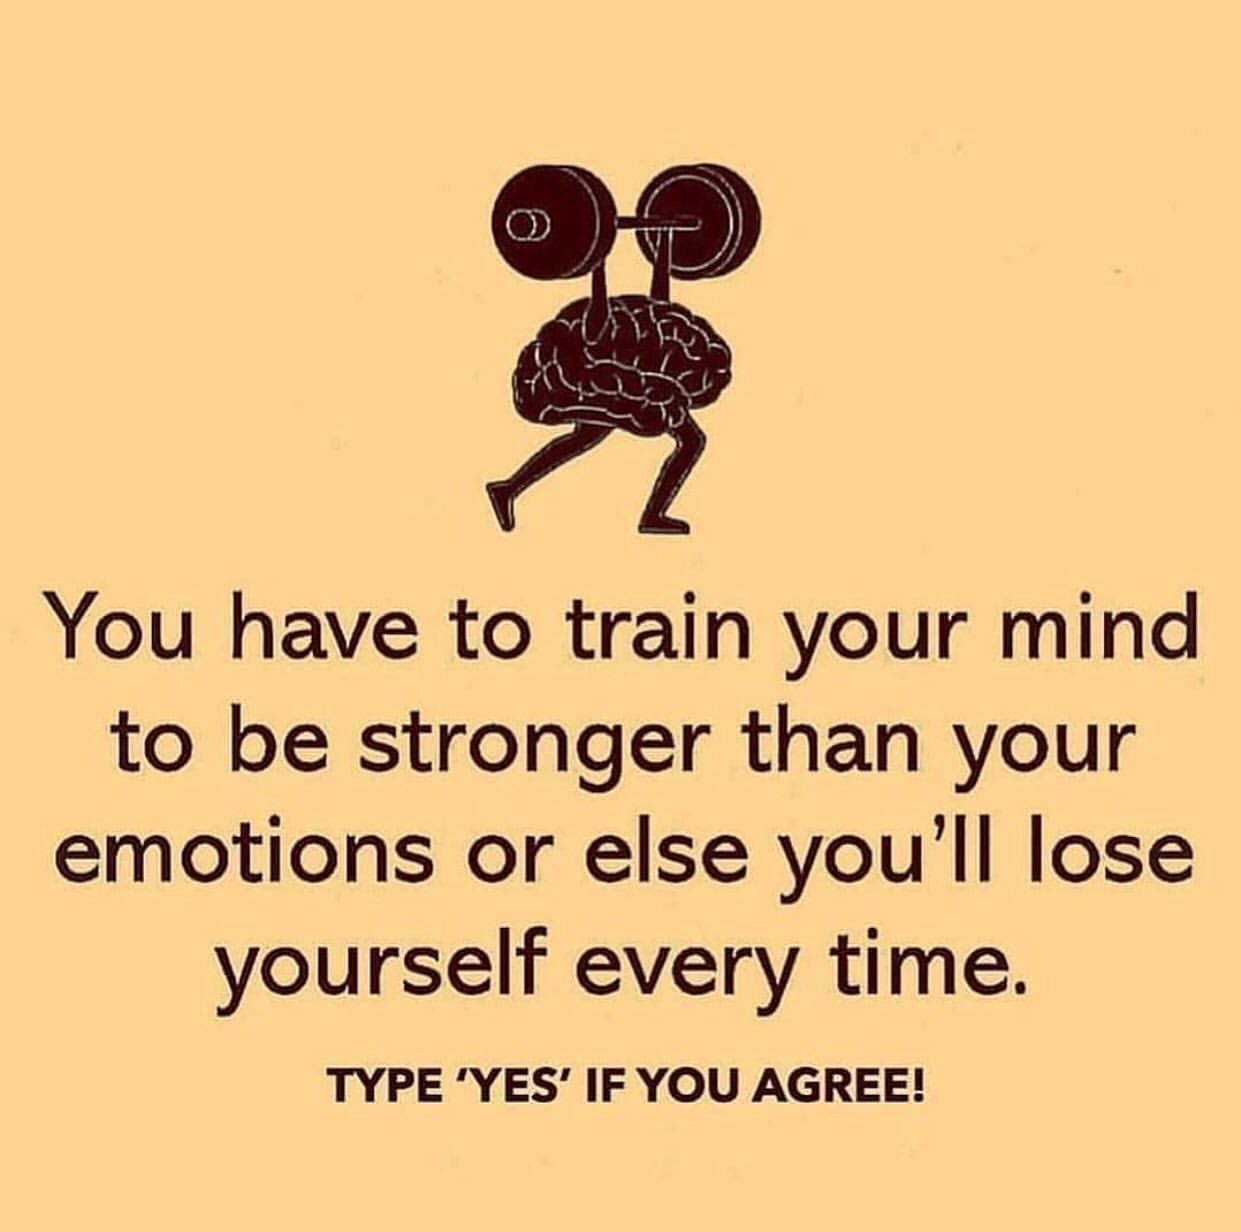 You have to train your mind to be stronger than your emotions or else you'll lose yourself every time. Type 'yes' if you agree!